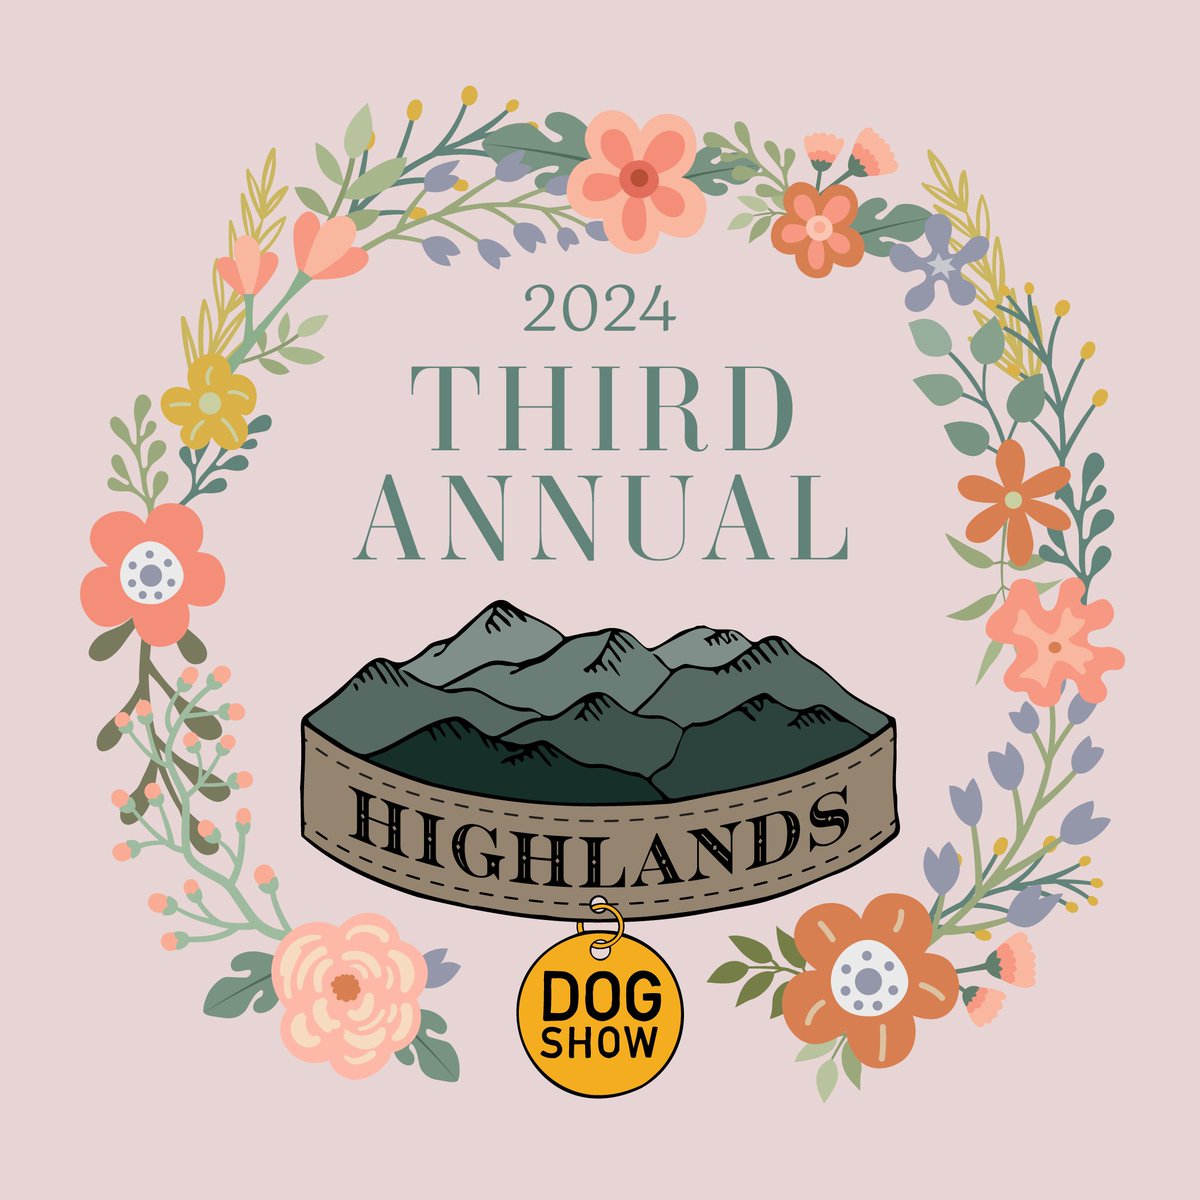 Celebrate Mother's Day weekend at the 3rd Annual Highlands Dogs Show on May 11th! Join us for a little canine competition and a whole lot of fun! 🐾

View the event page for more details: bit.ly/3VVZPcJ

#HighlandsNC #DogShow #MothersDayWeekend